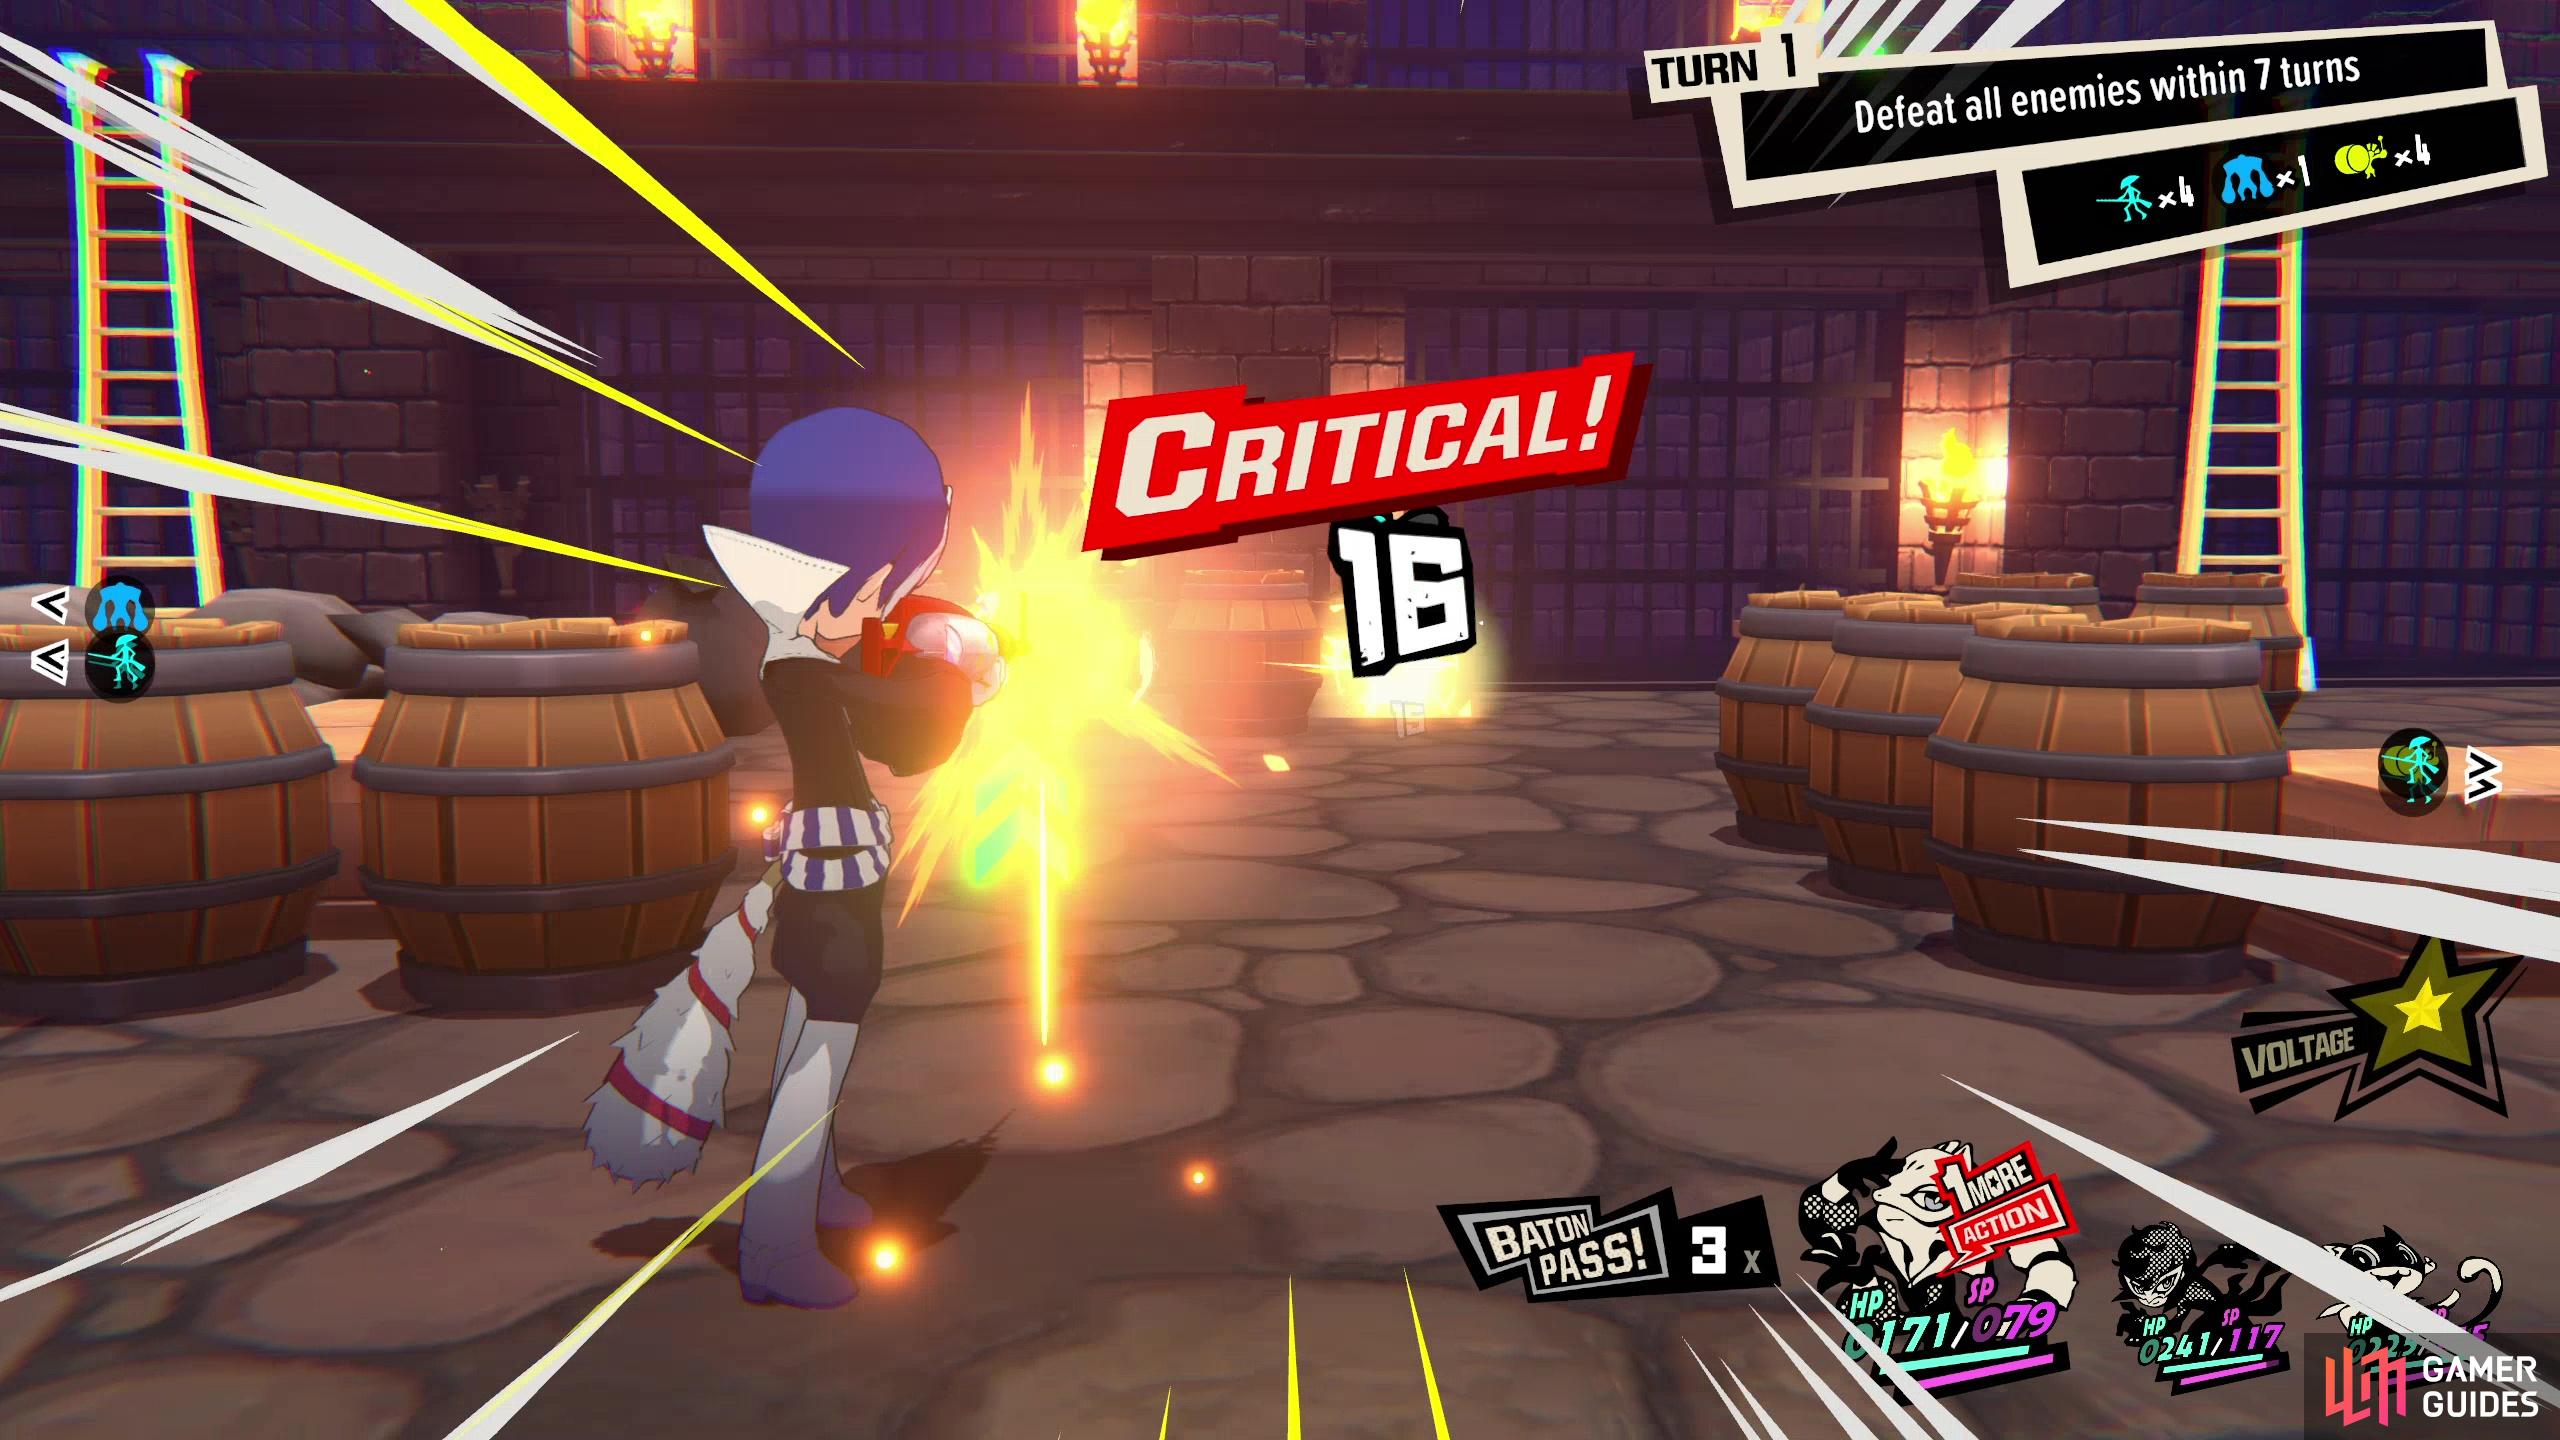 In addition to a high movement range, Yusuke has great range with ranged attacks, enabling him to score One Mores off of distant targets.